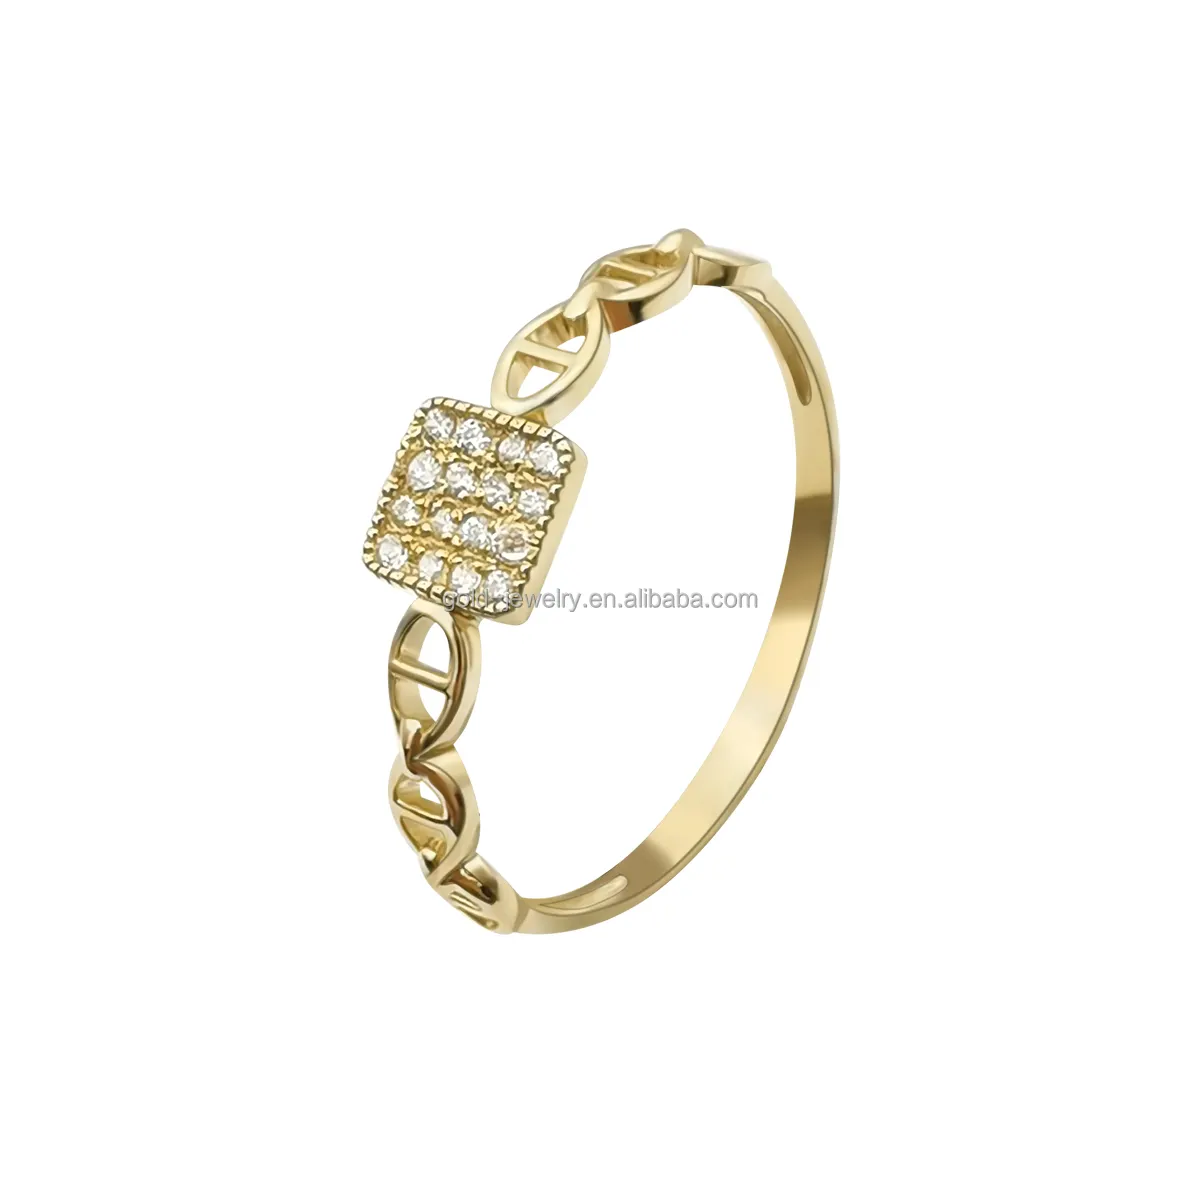 Gold Ring Finger Ring Women's Jewelry Wholesale 9k Gold Ring with Rich Zircon Stone Square Plat 9K Real Yellow Trade Assurance